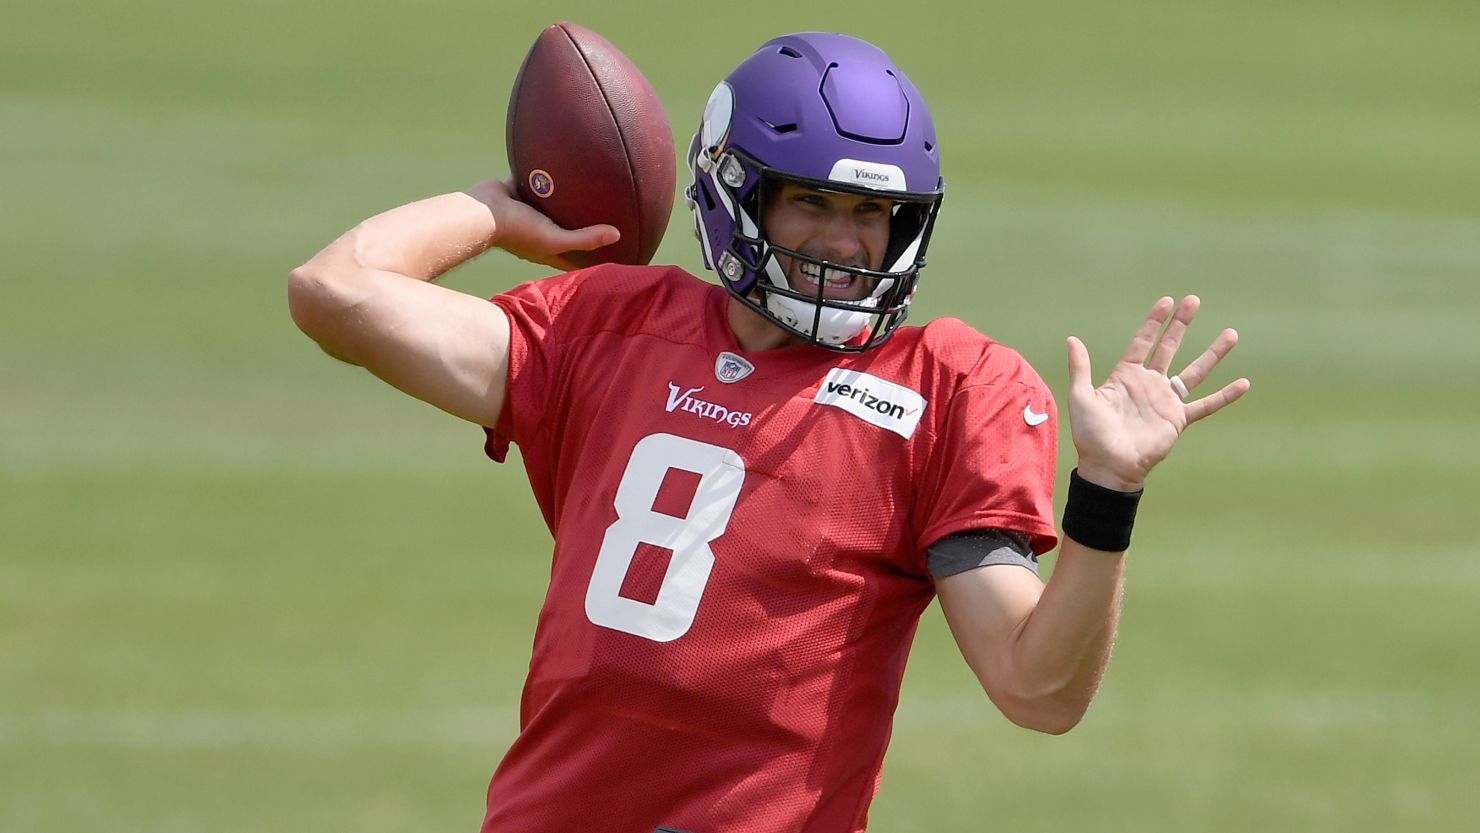 Quarterback Kirk Cousins #8 of the Minnesota Vikings passes the ball during training camp on August 19, 2020.